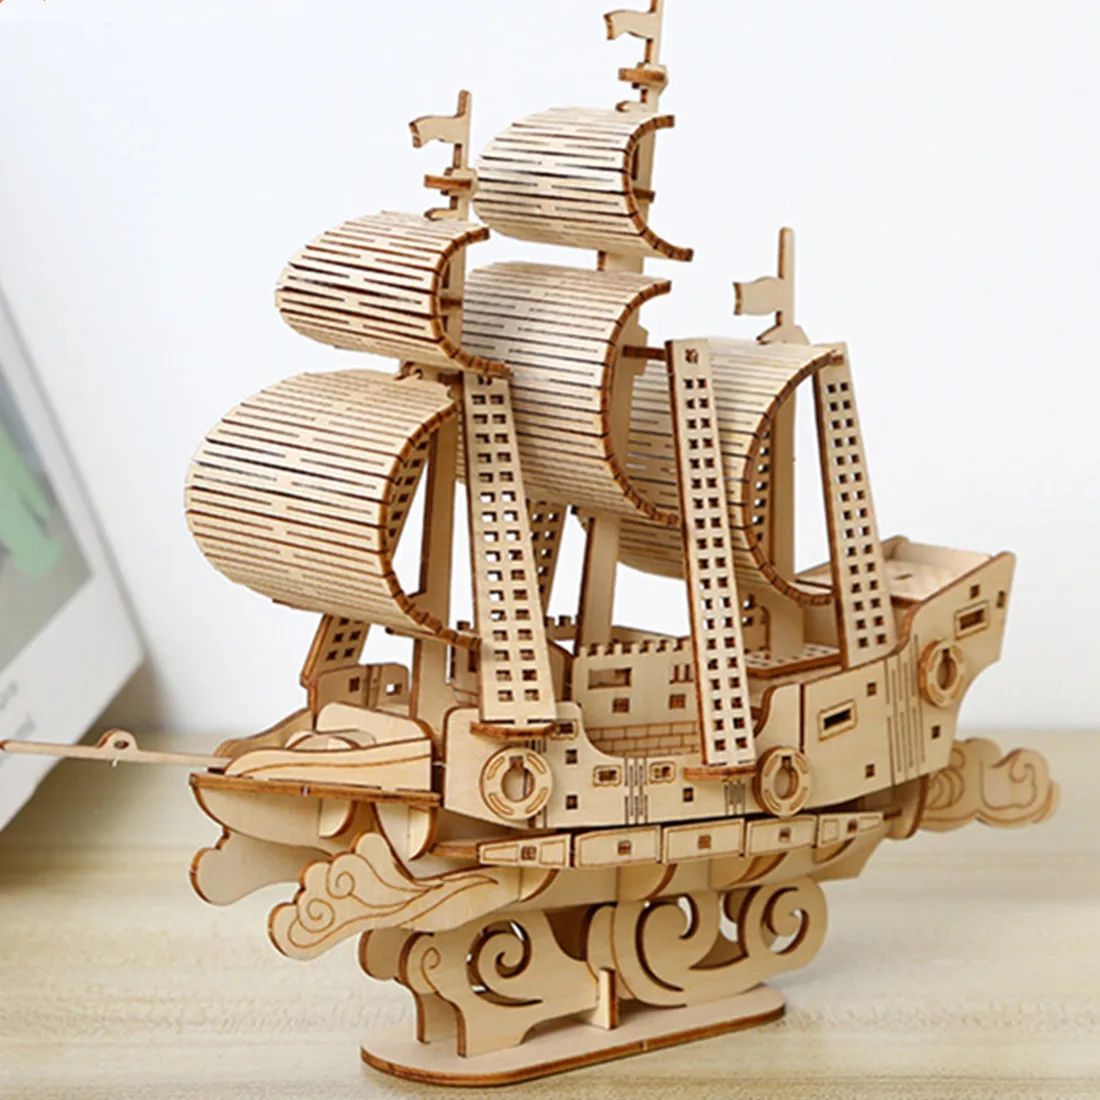 3D Puzzles Wooden Ocean Sailing Model Handmade Boat Building BlockS Kits DIY Assembly Ship Toy for Kids Adults GiftS mediterranean steamship pirate ship set the table small wooden boat marine style ornament ornament creative boat model crafts